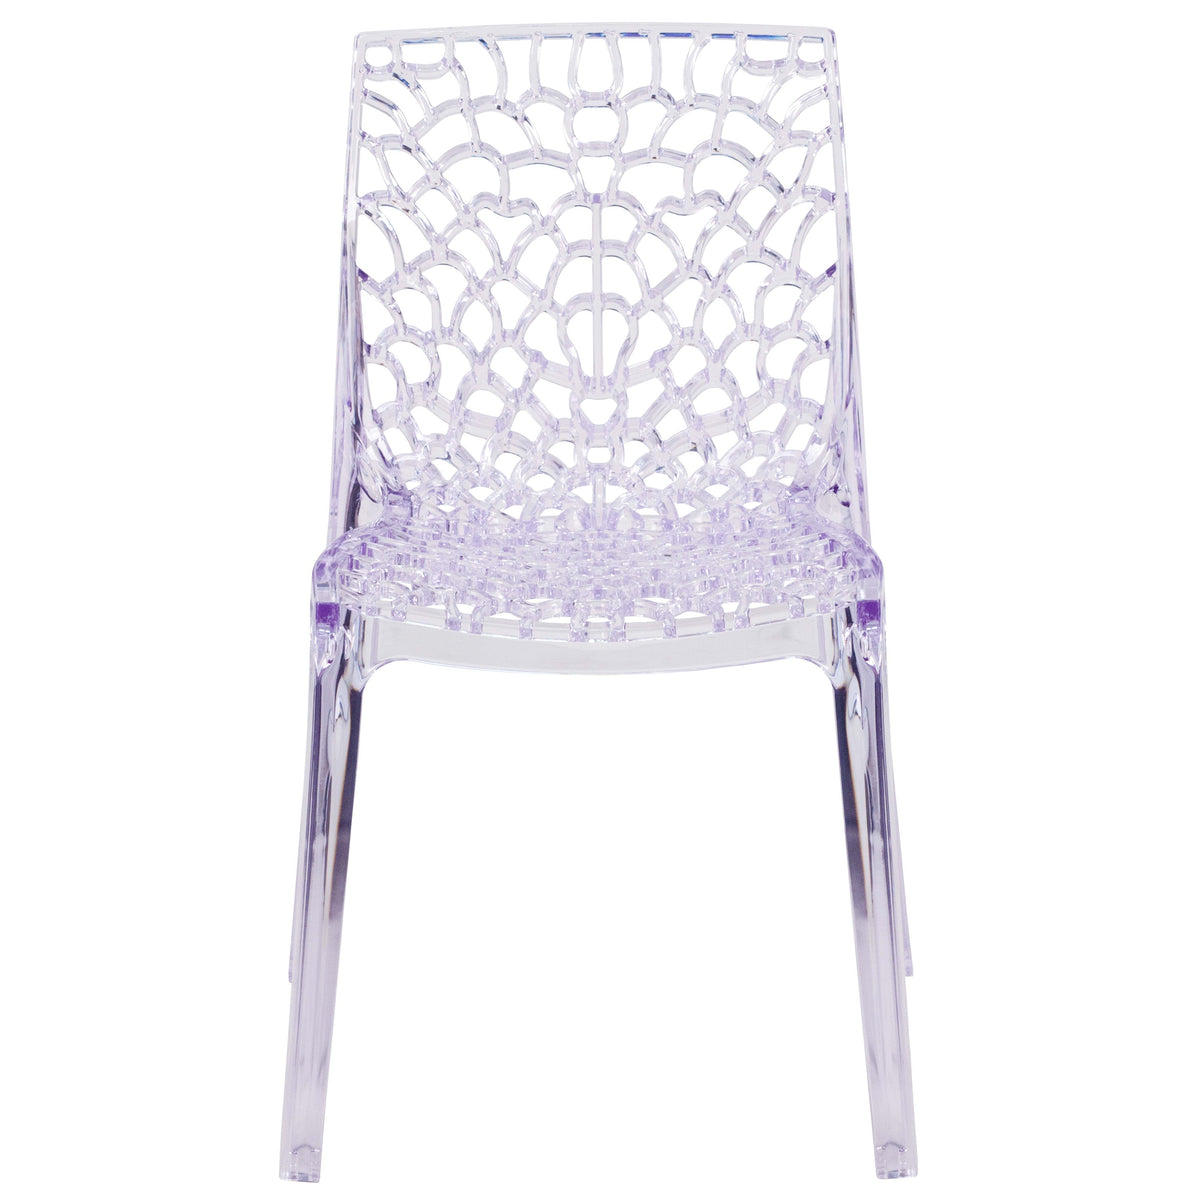 Transparent Stacking Side Chair with Artistic Pattern Design